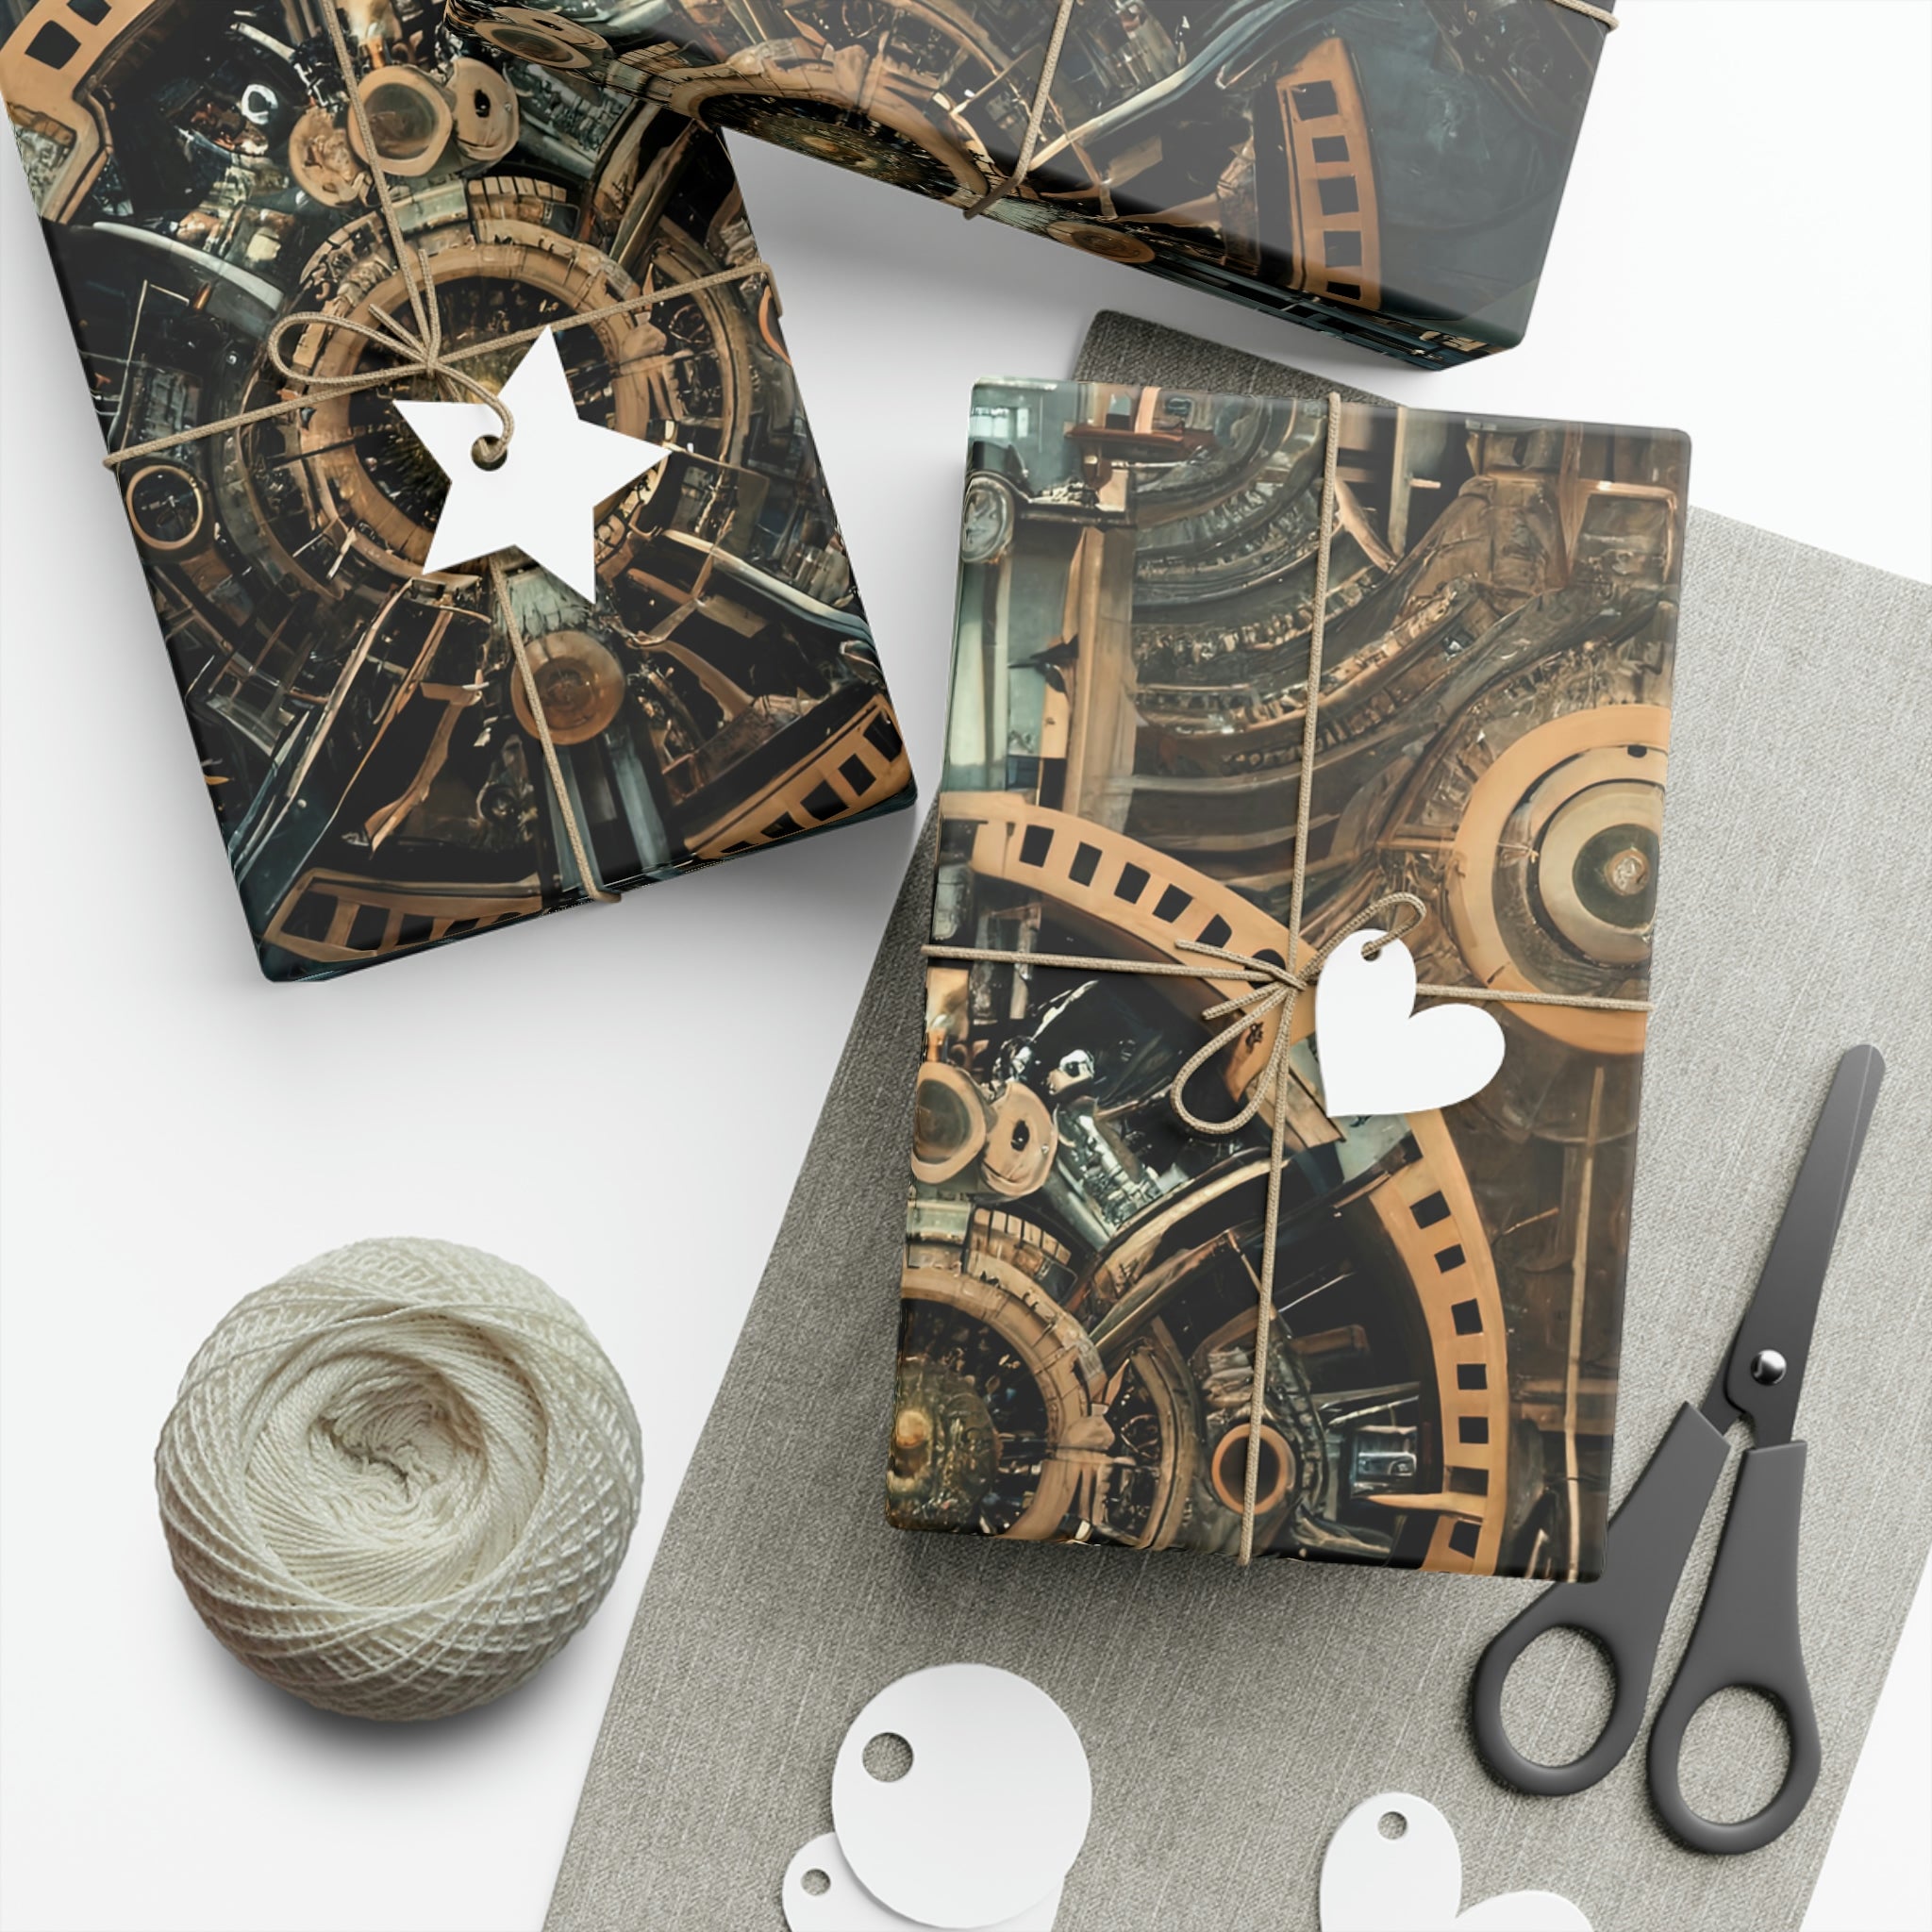 Steampunk Gear Gift Wrap Papers (Christmas, Birthday, Friendship, Holiday, Gifts)